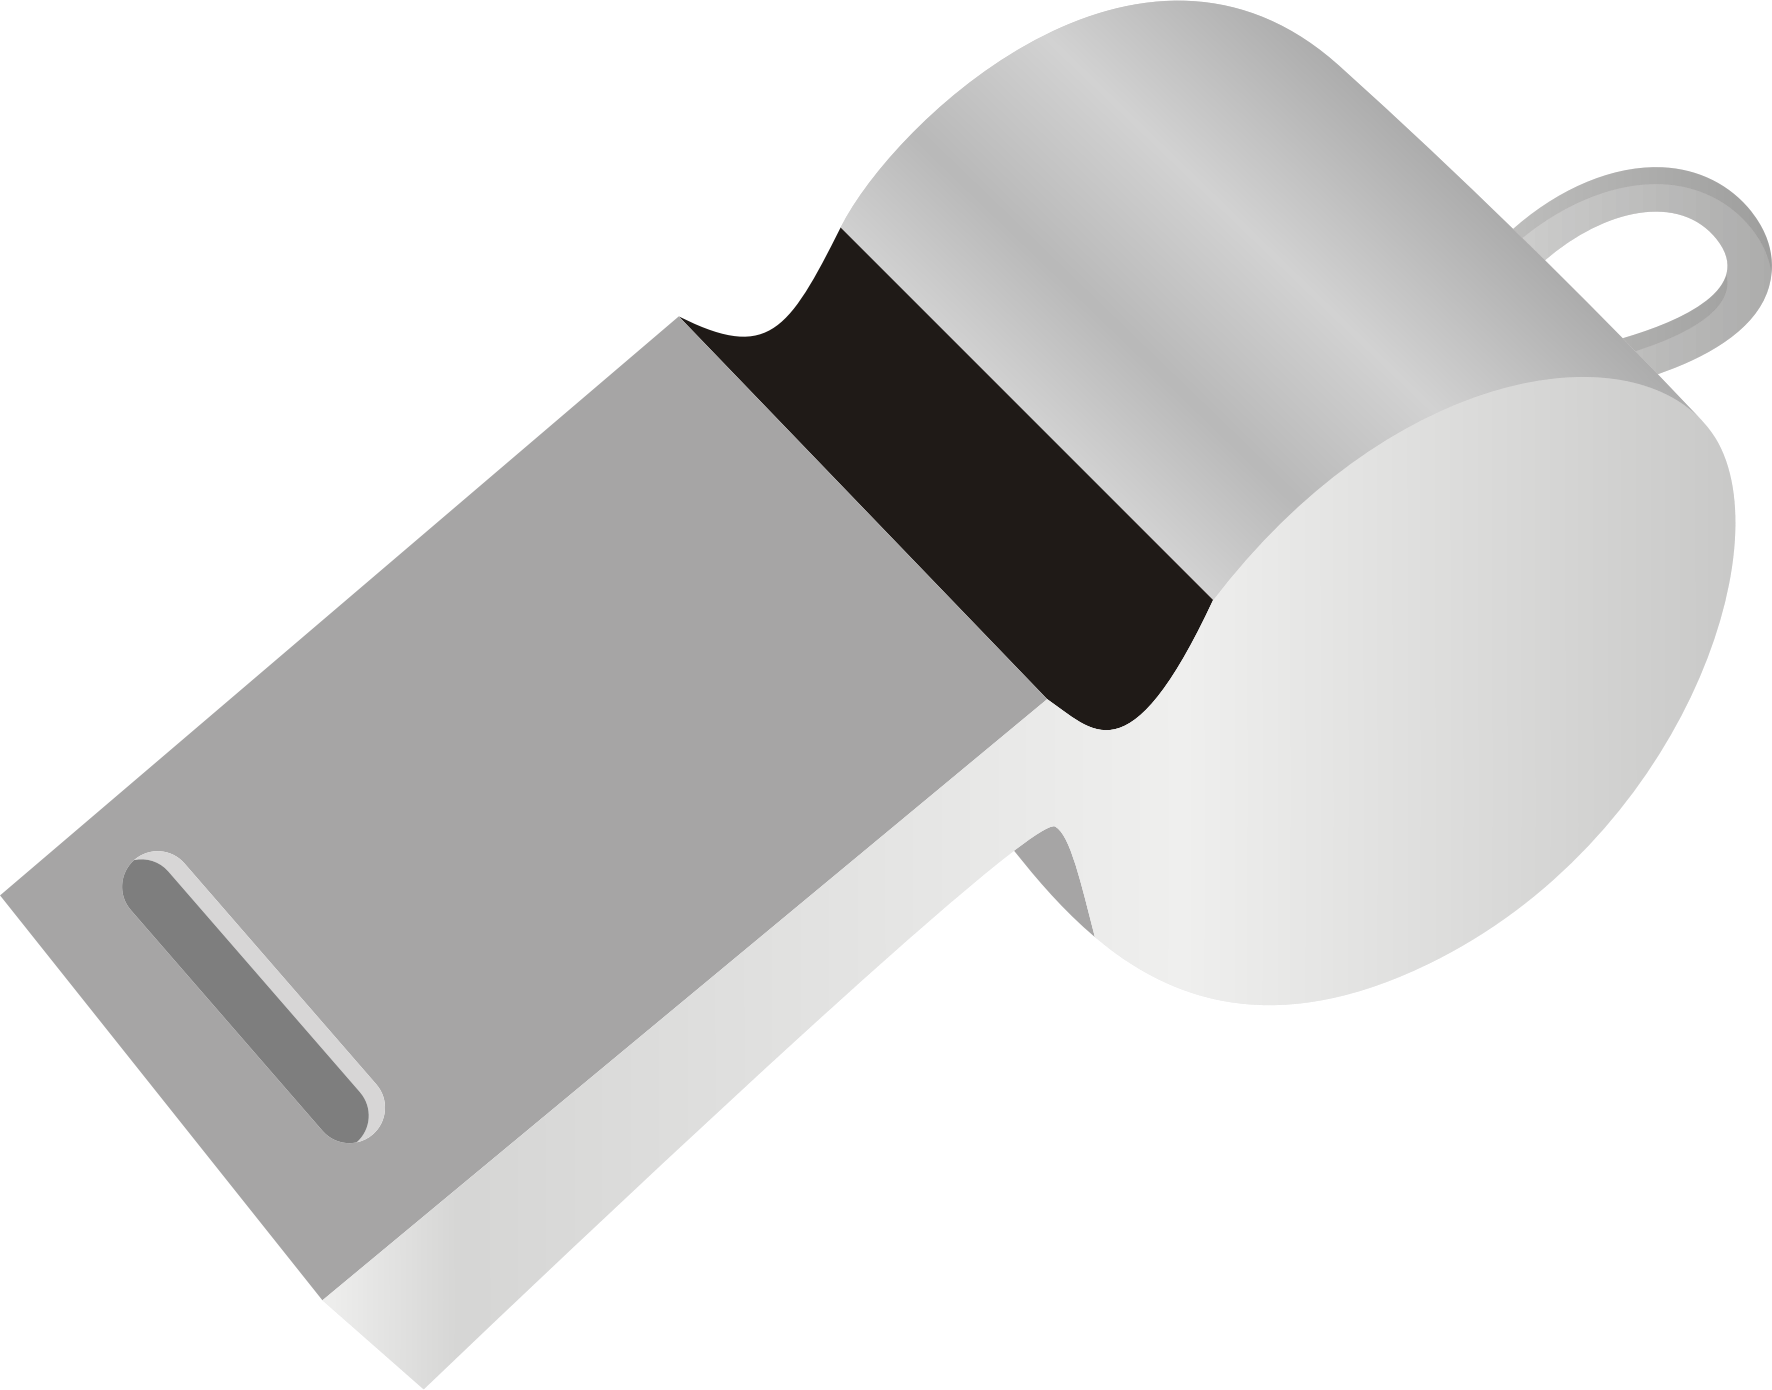 Whistle PNG HD - 128053